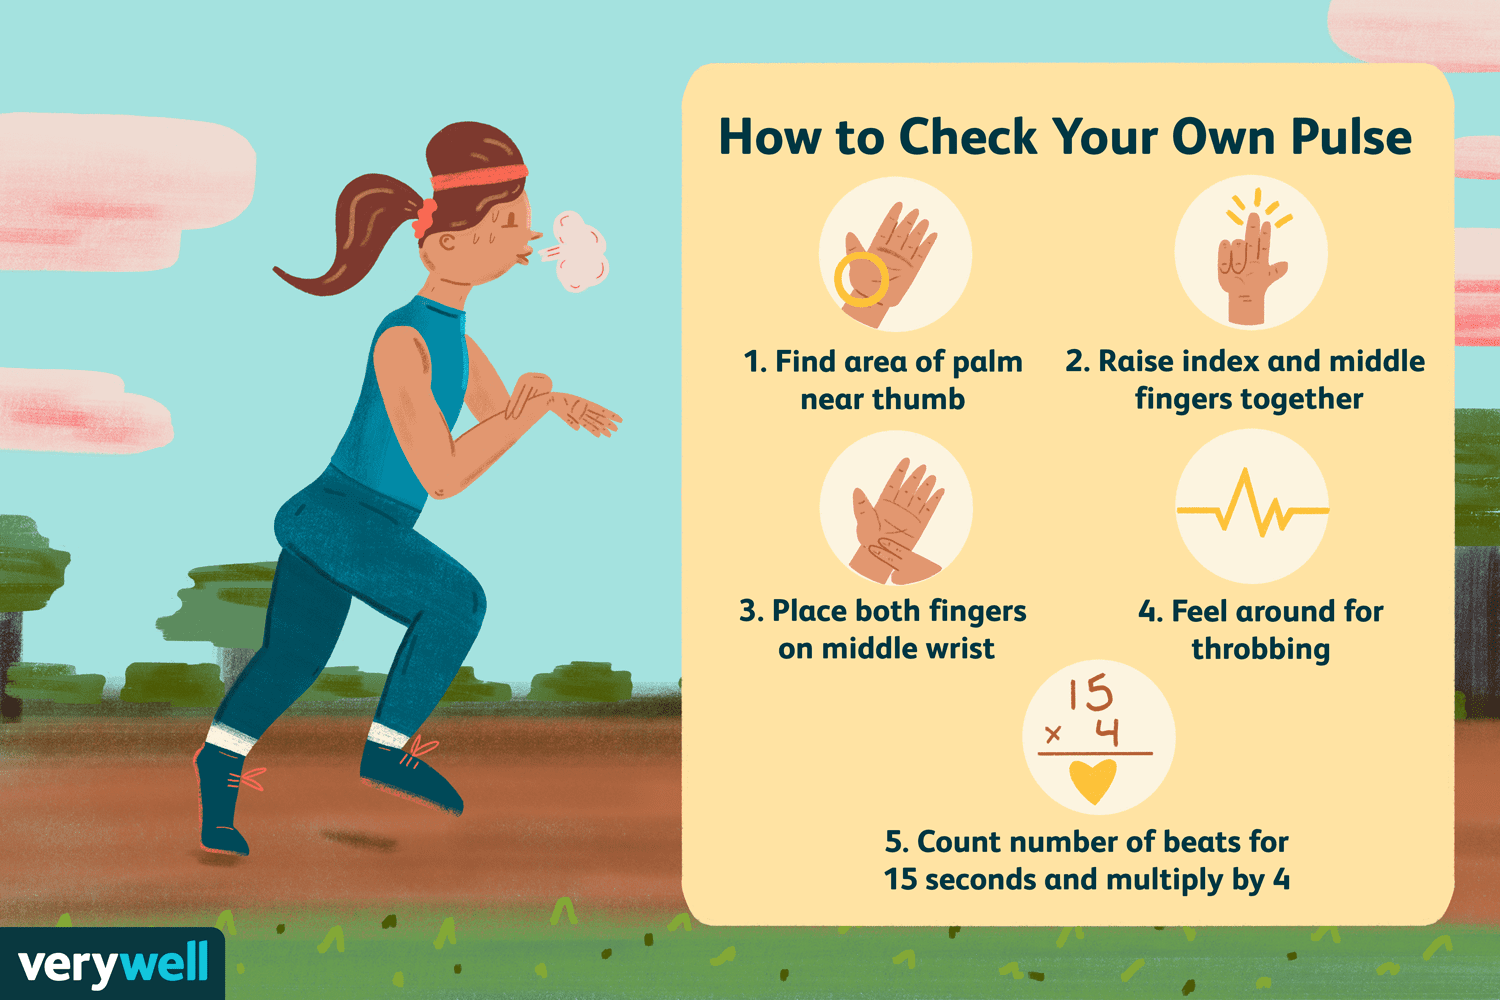 How to check your pulse